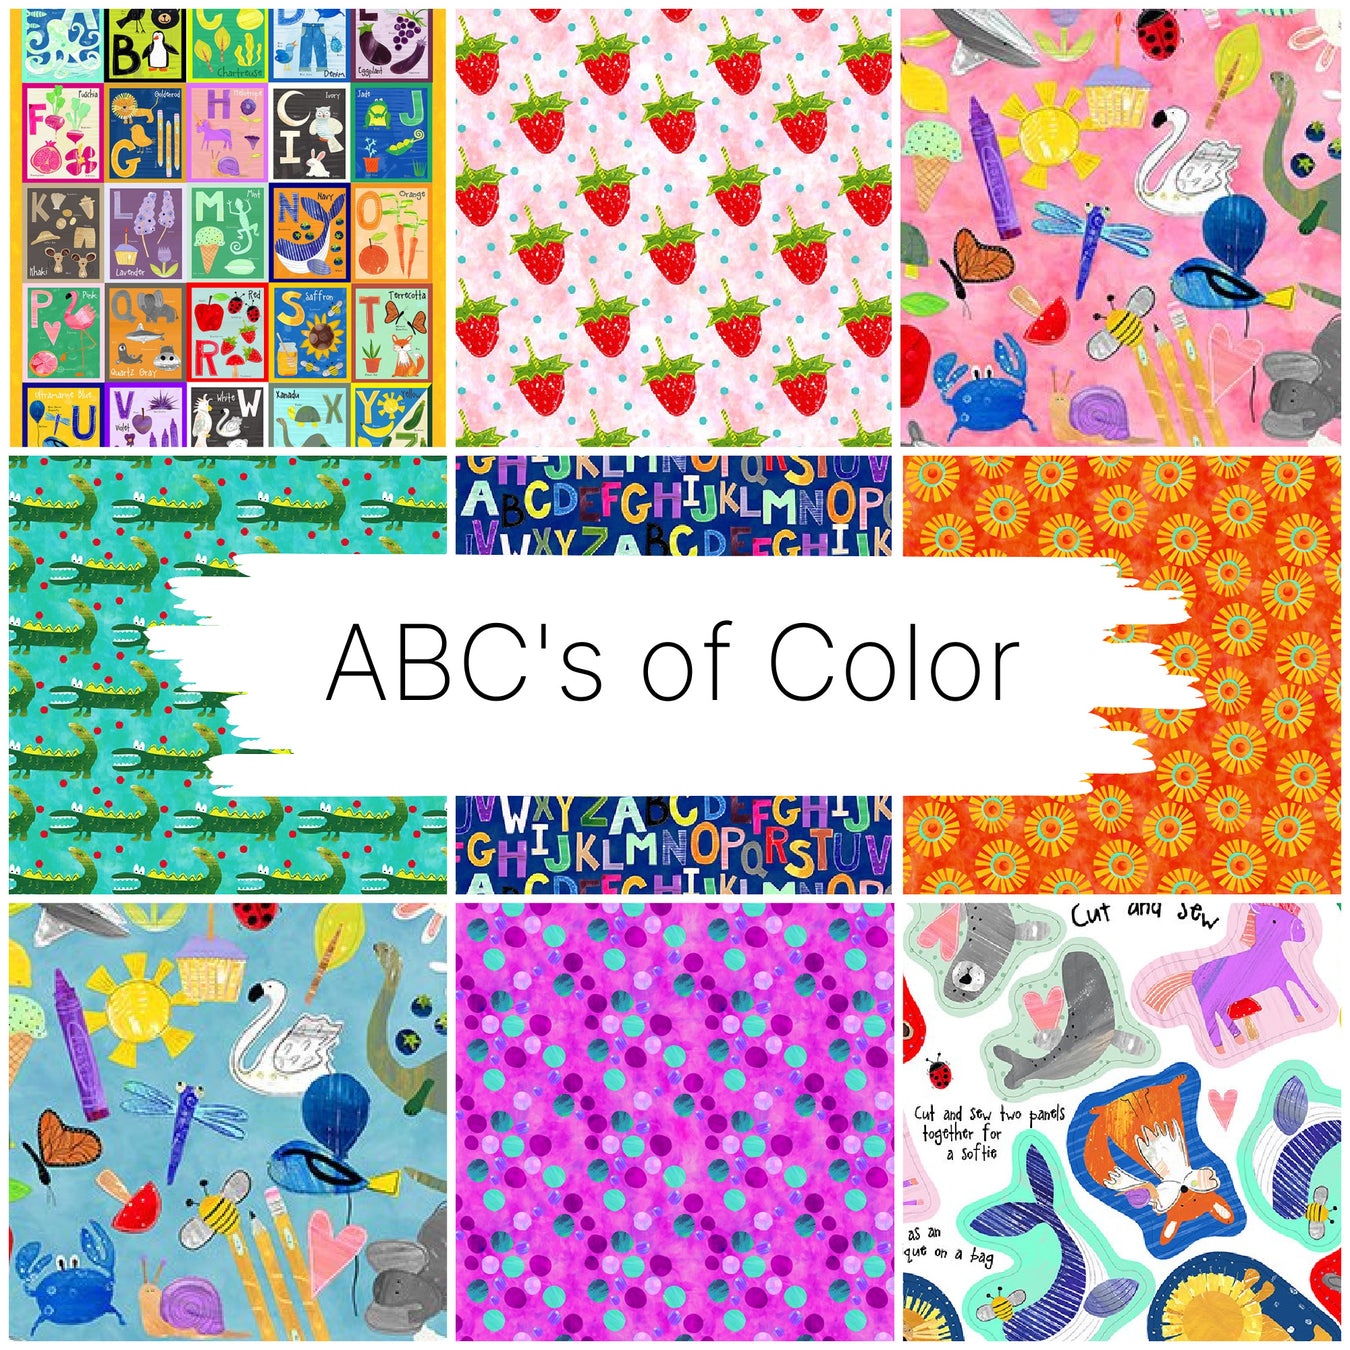 ABC's of Color